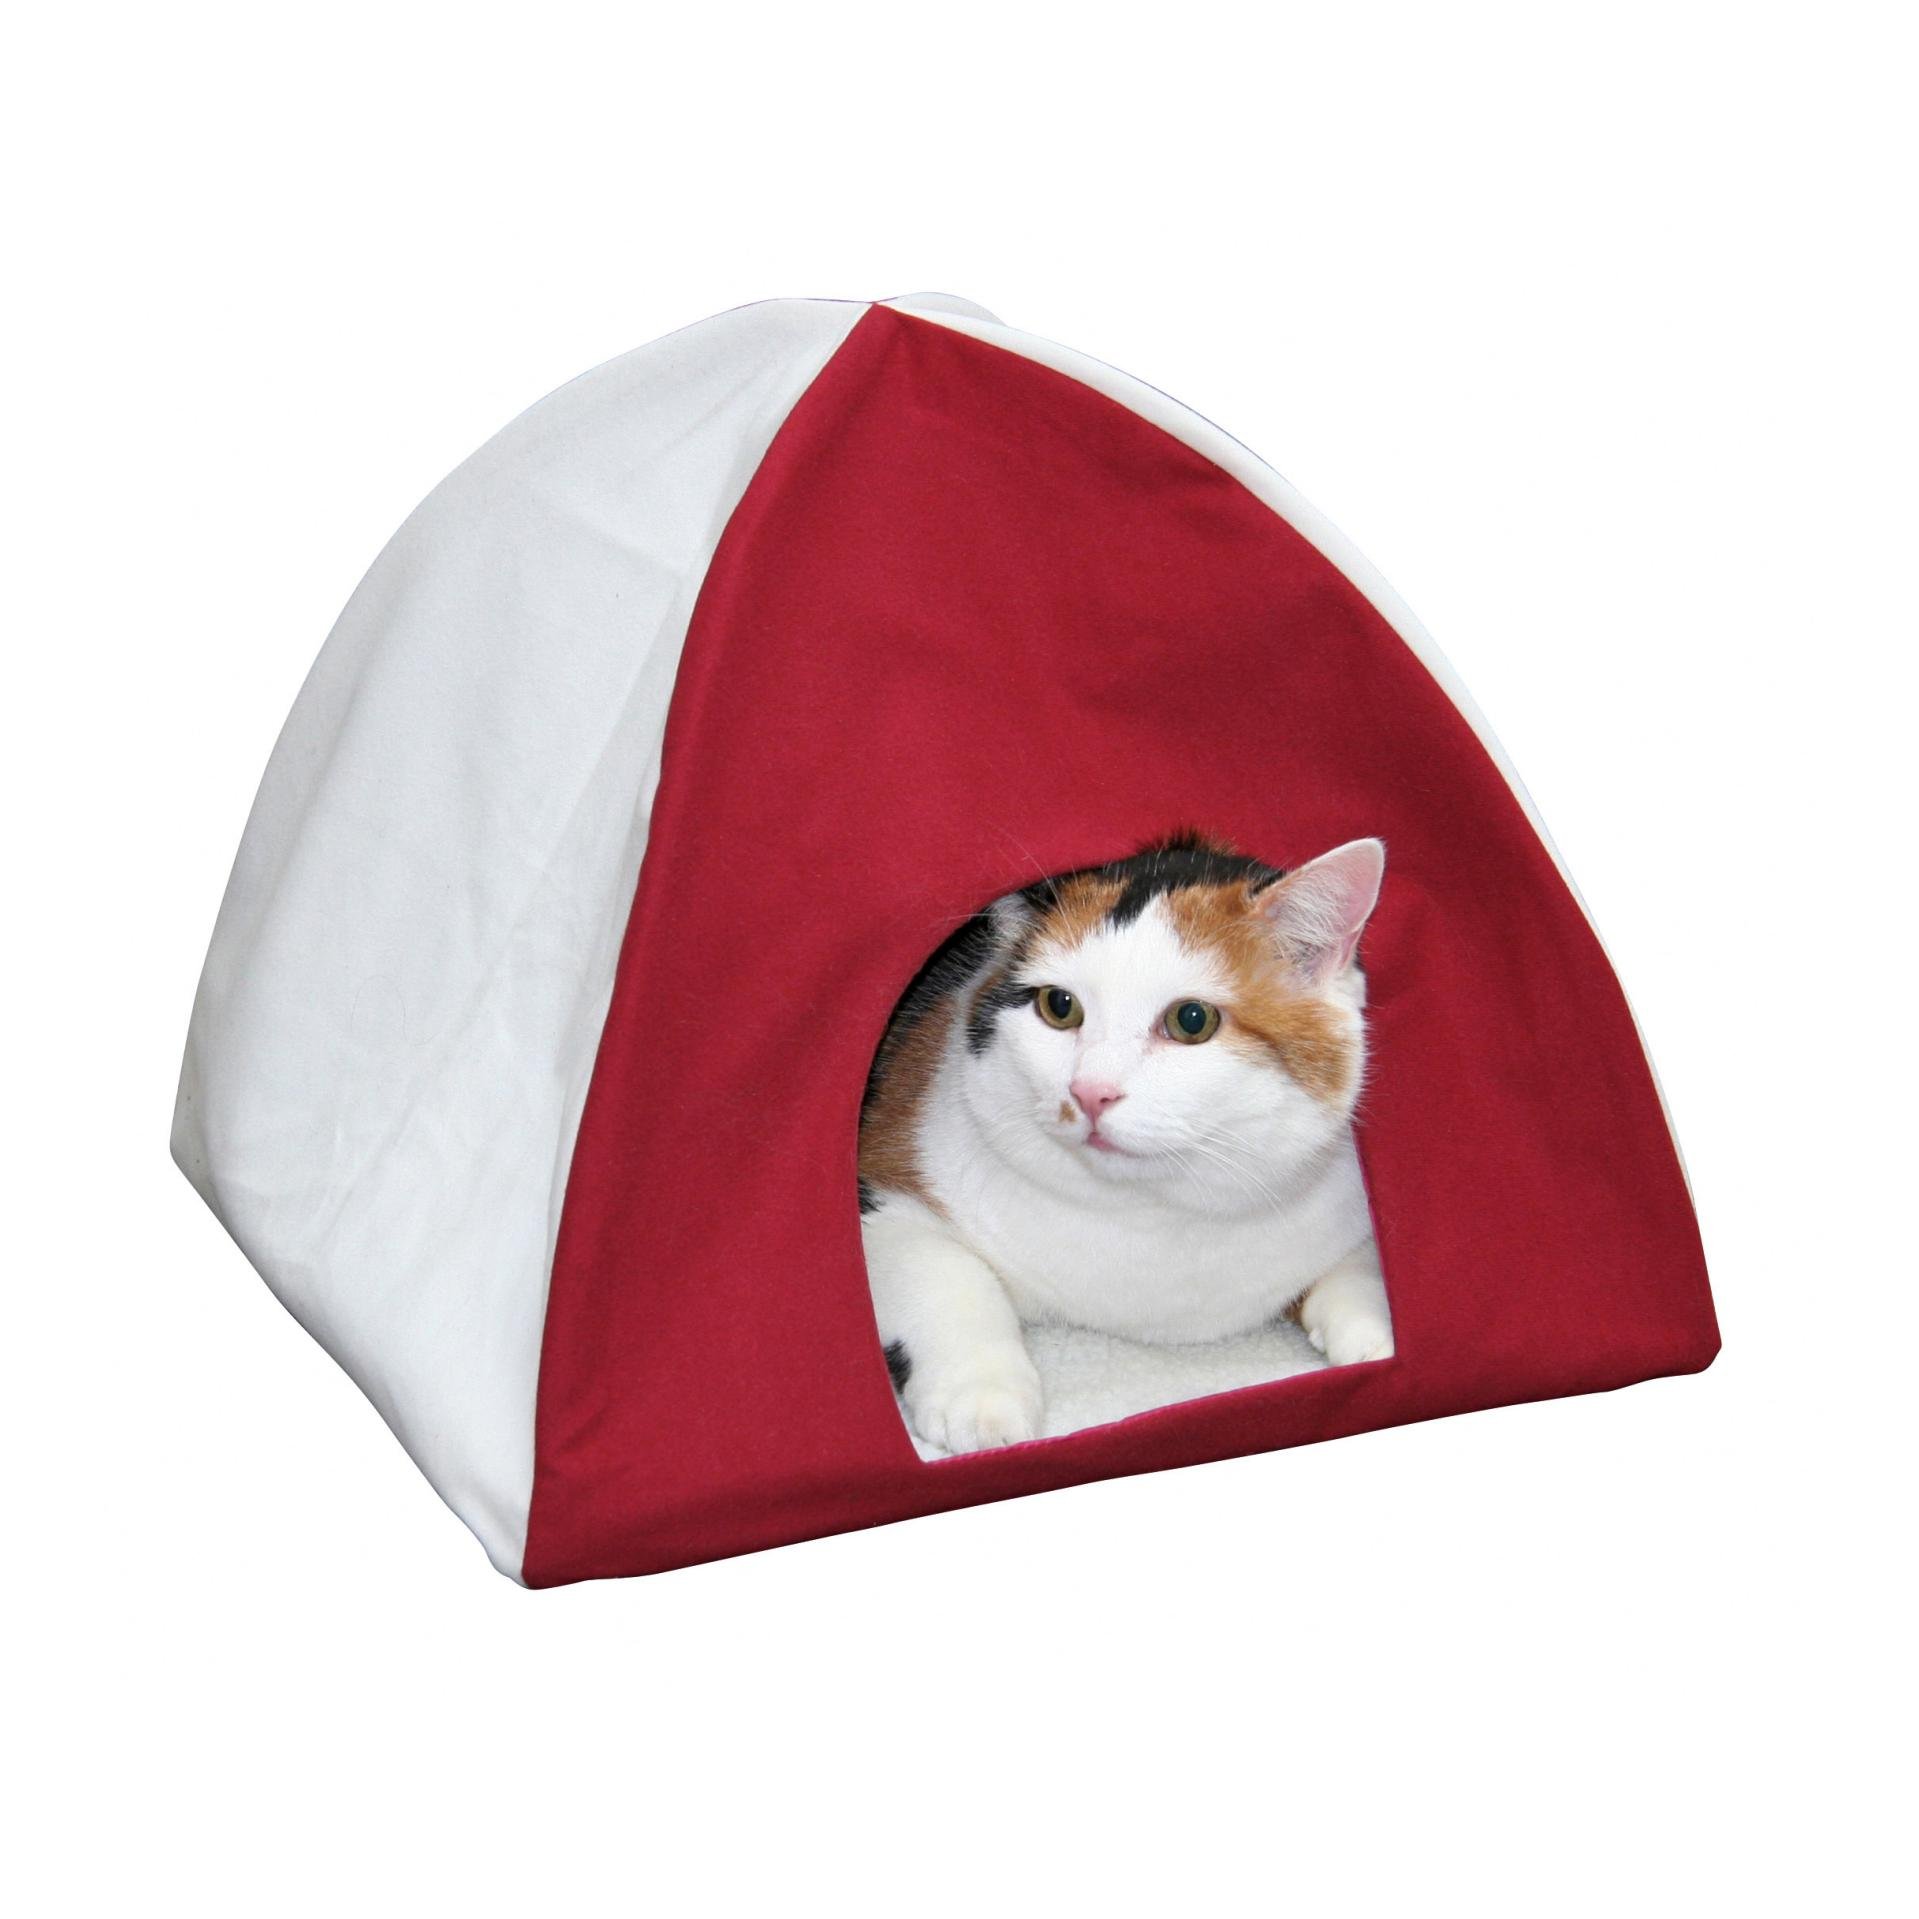 Kerbl Tipi Tente pour chat - Weiss/Rot